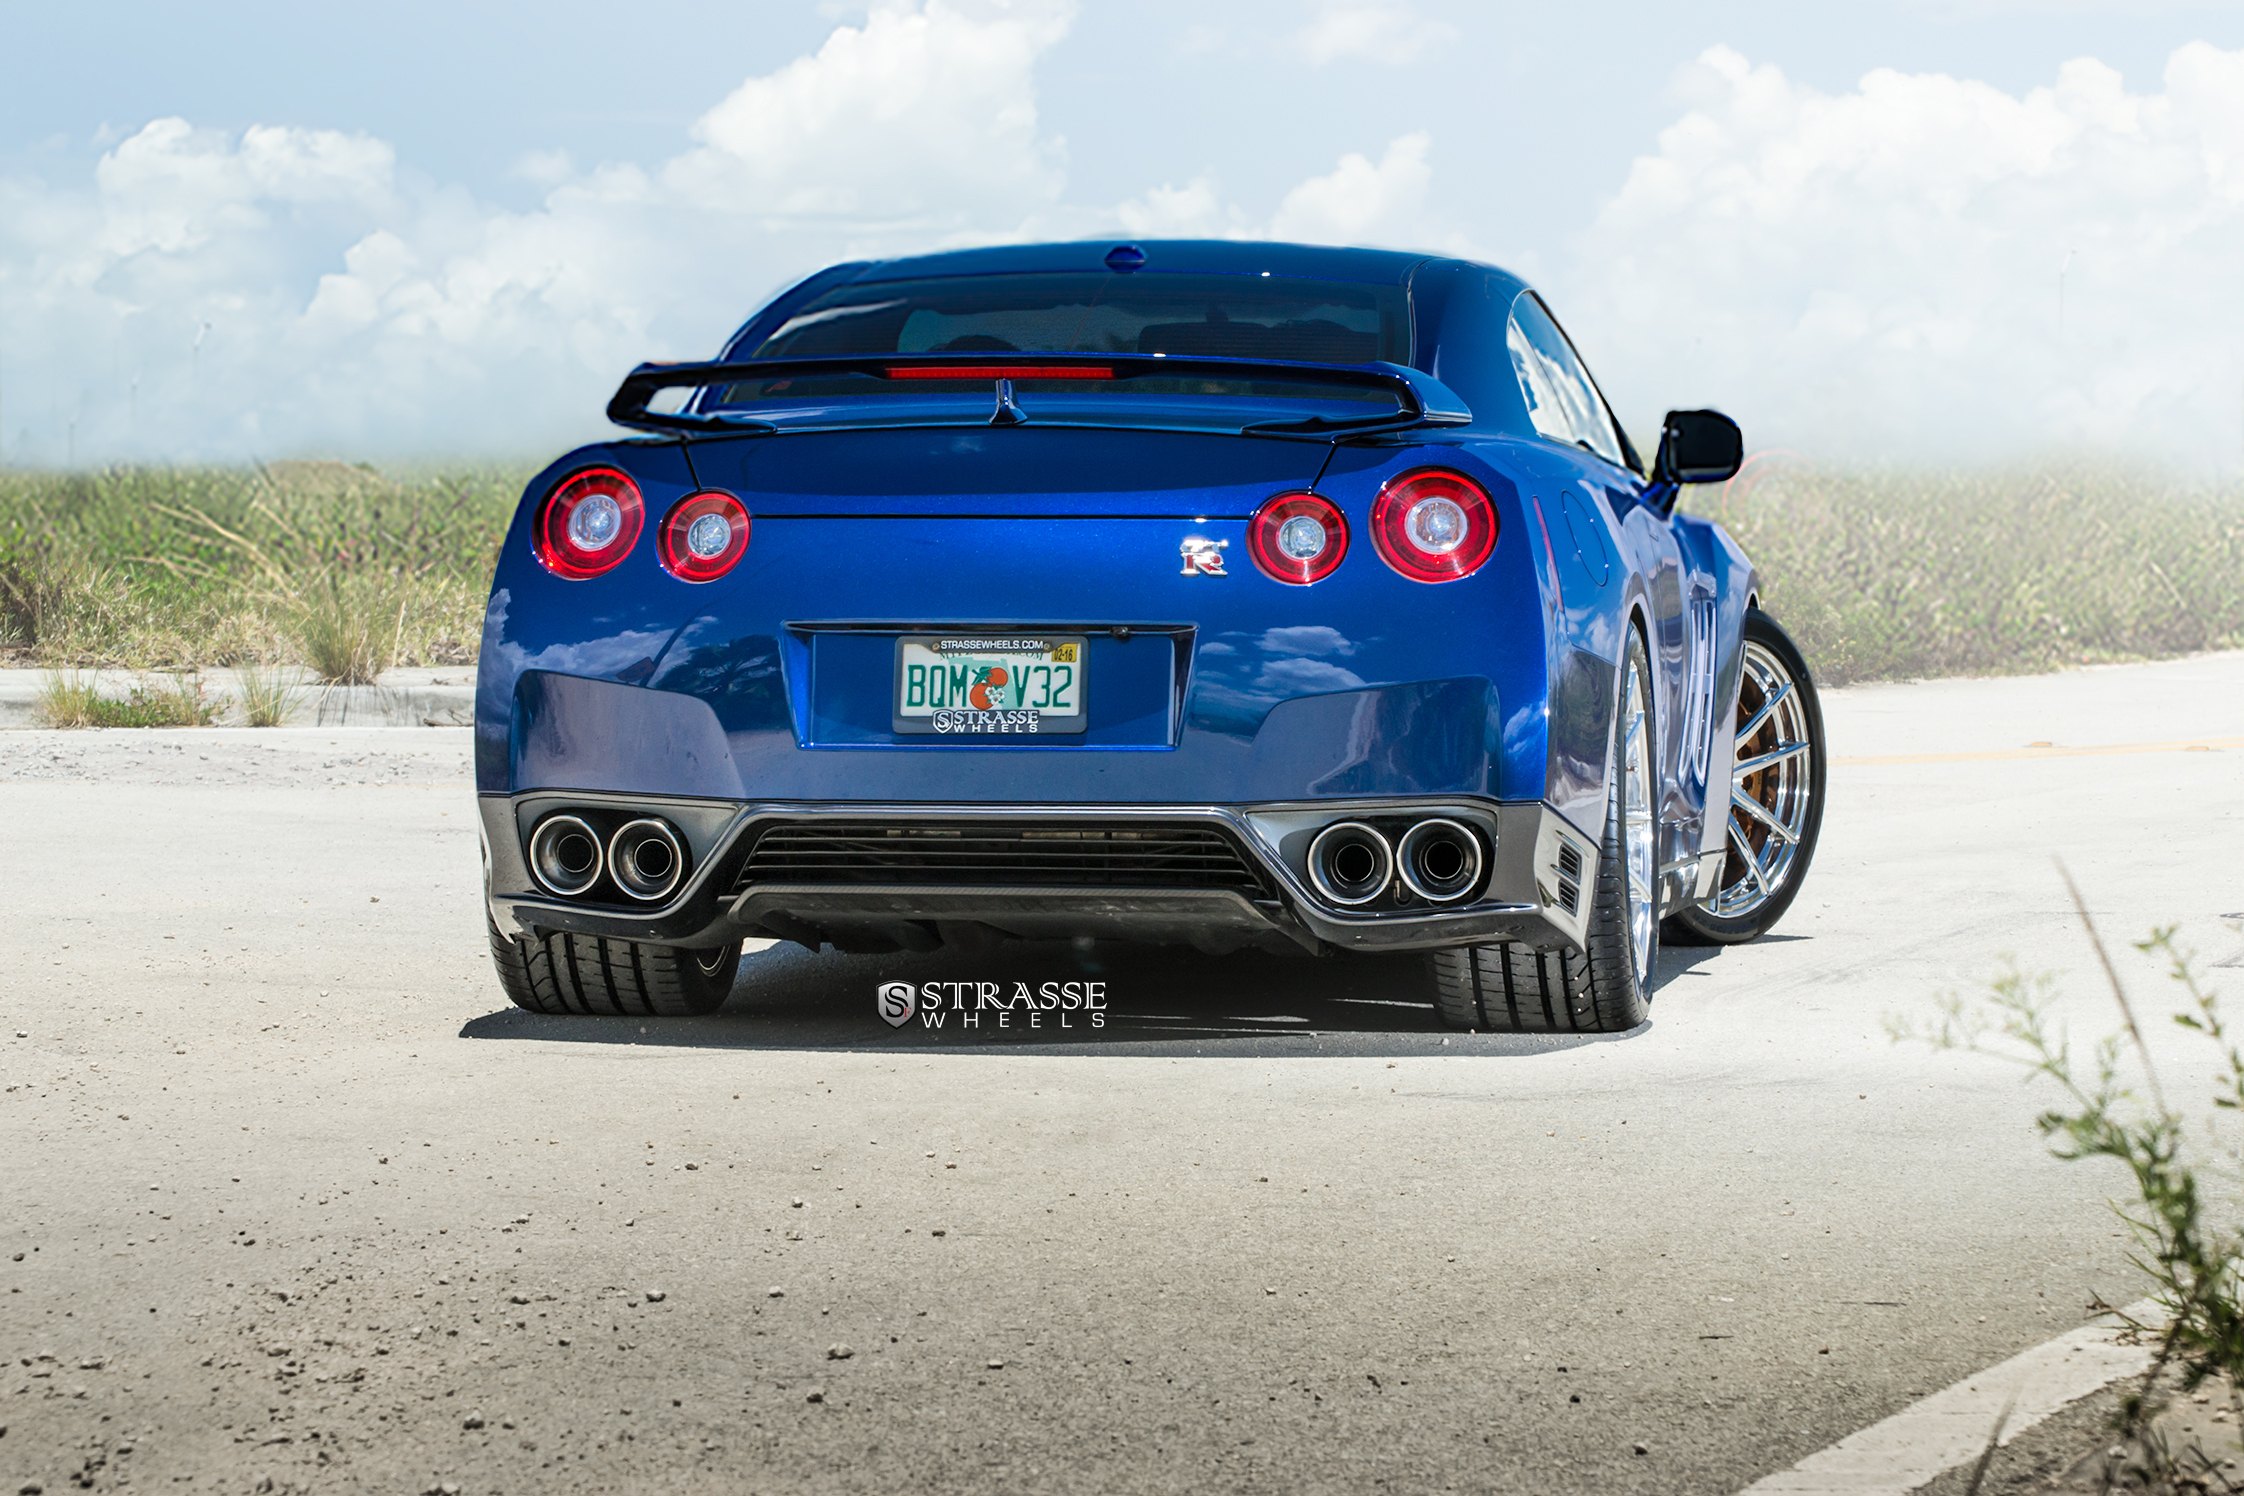 Rear Diffuser with Dual Exhaust Tips on Blue Nissan GT-R - Photo by Strasse Forged